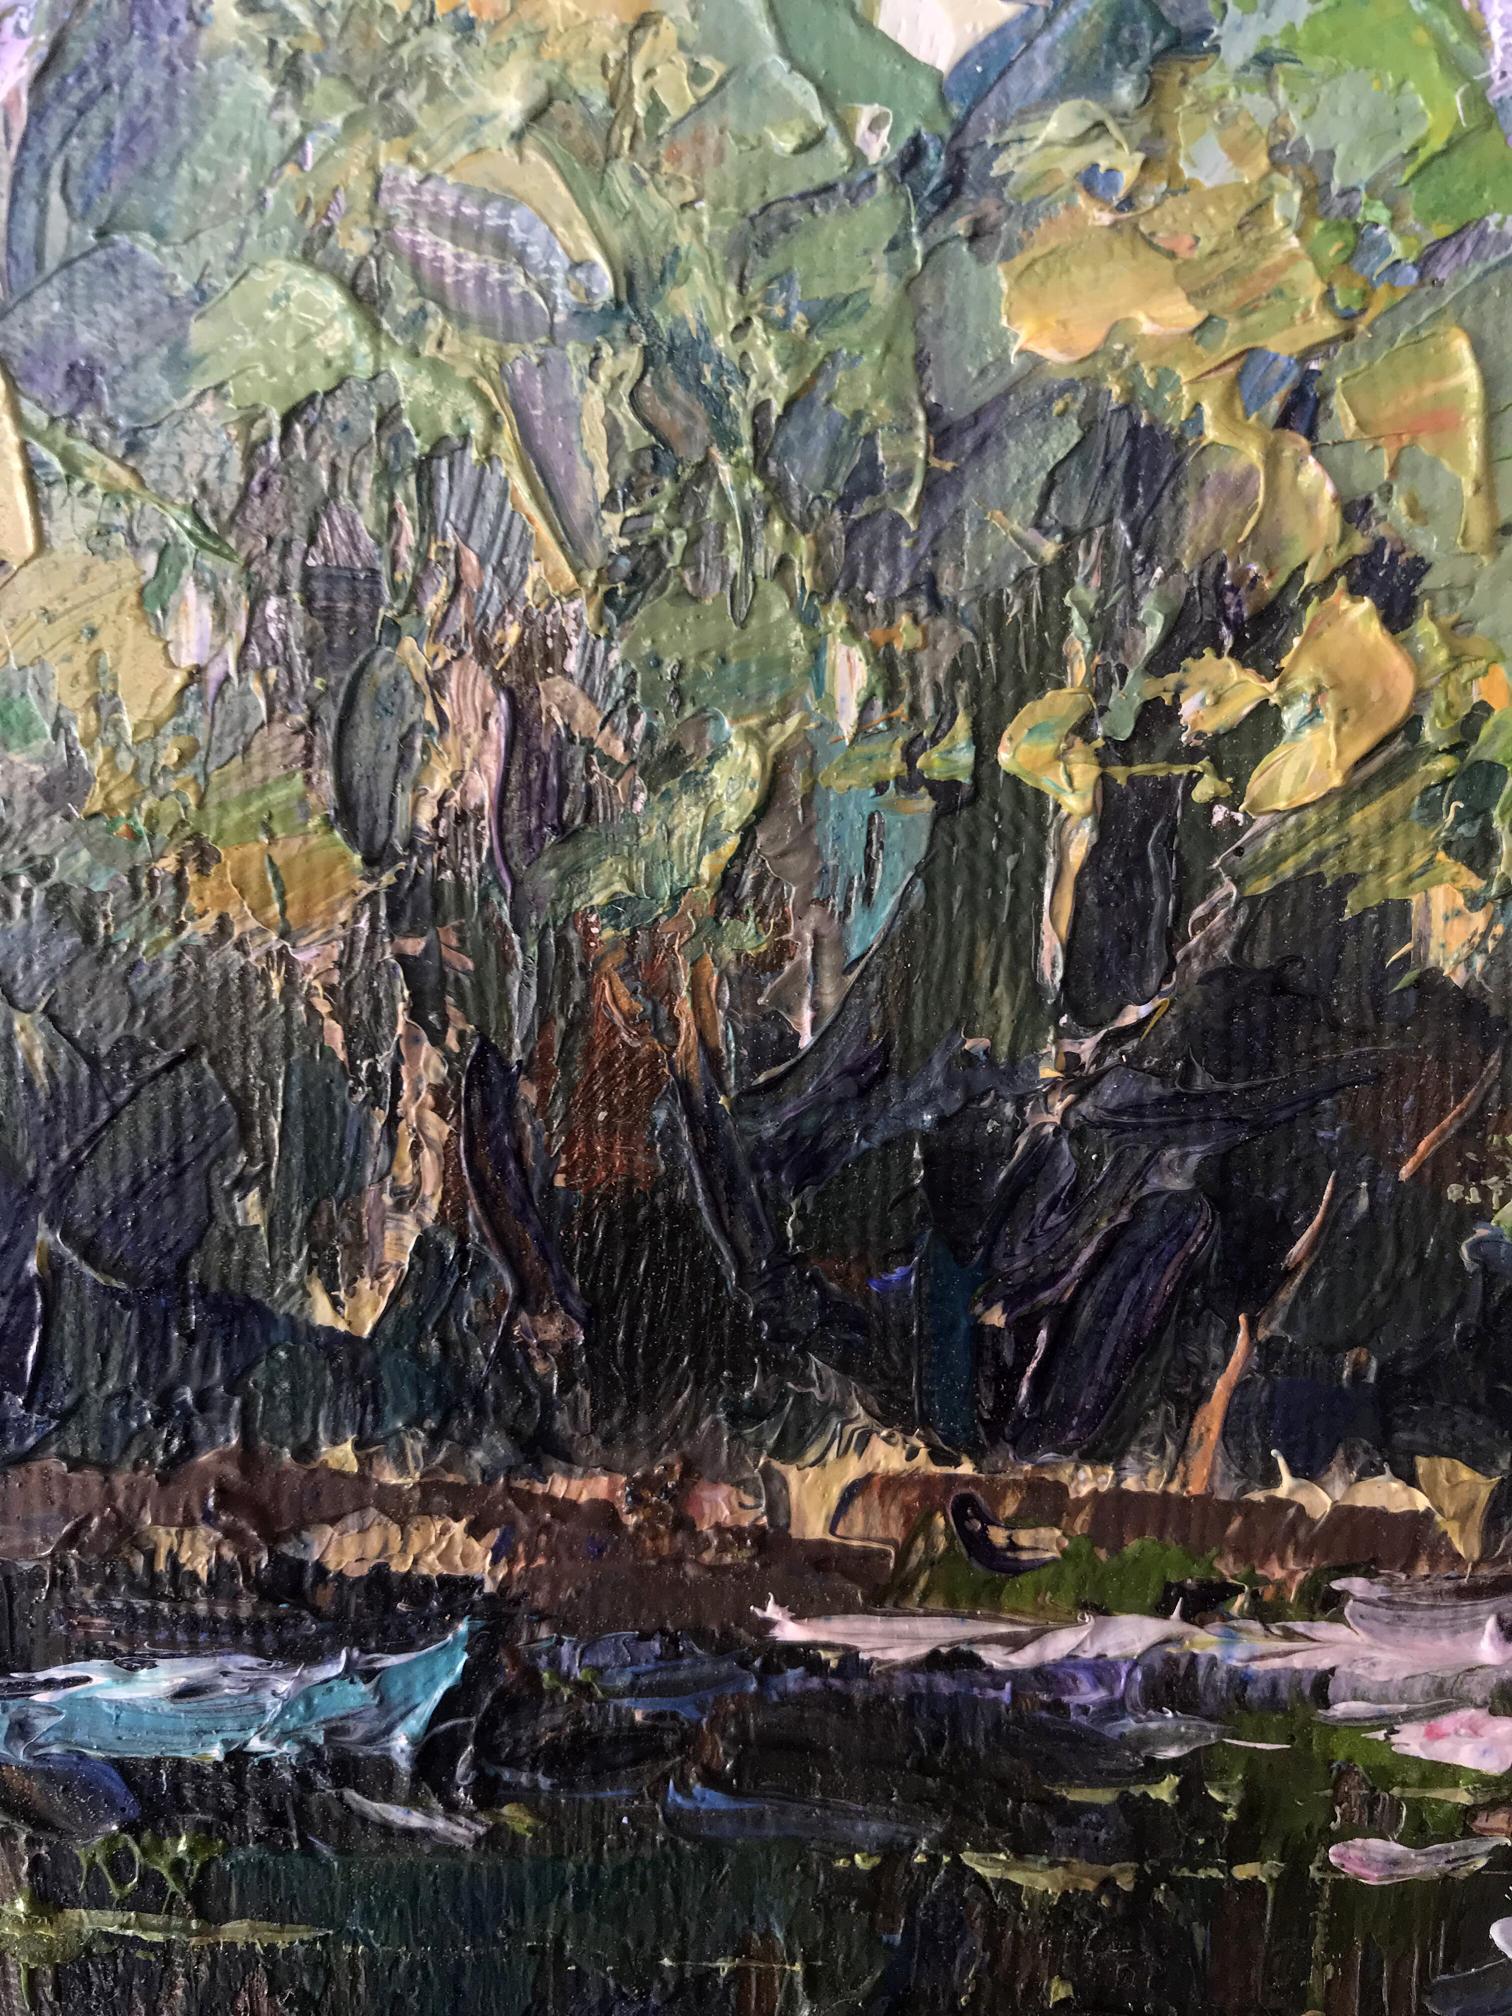 A secluded lake in the forest, portrayed by Oksana Ivanyuk in her oil artwork